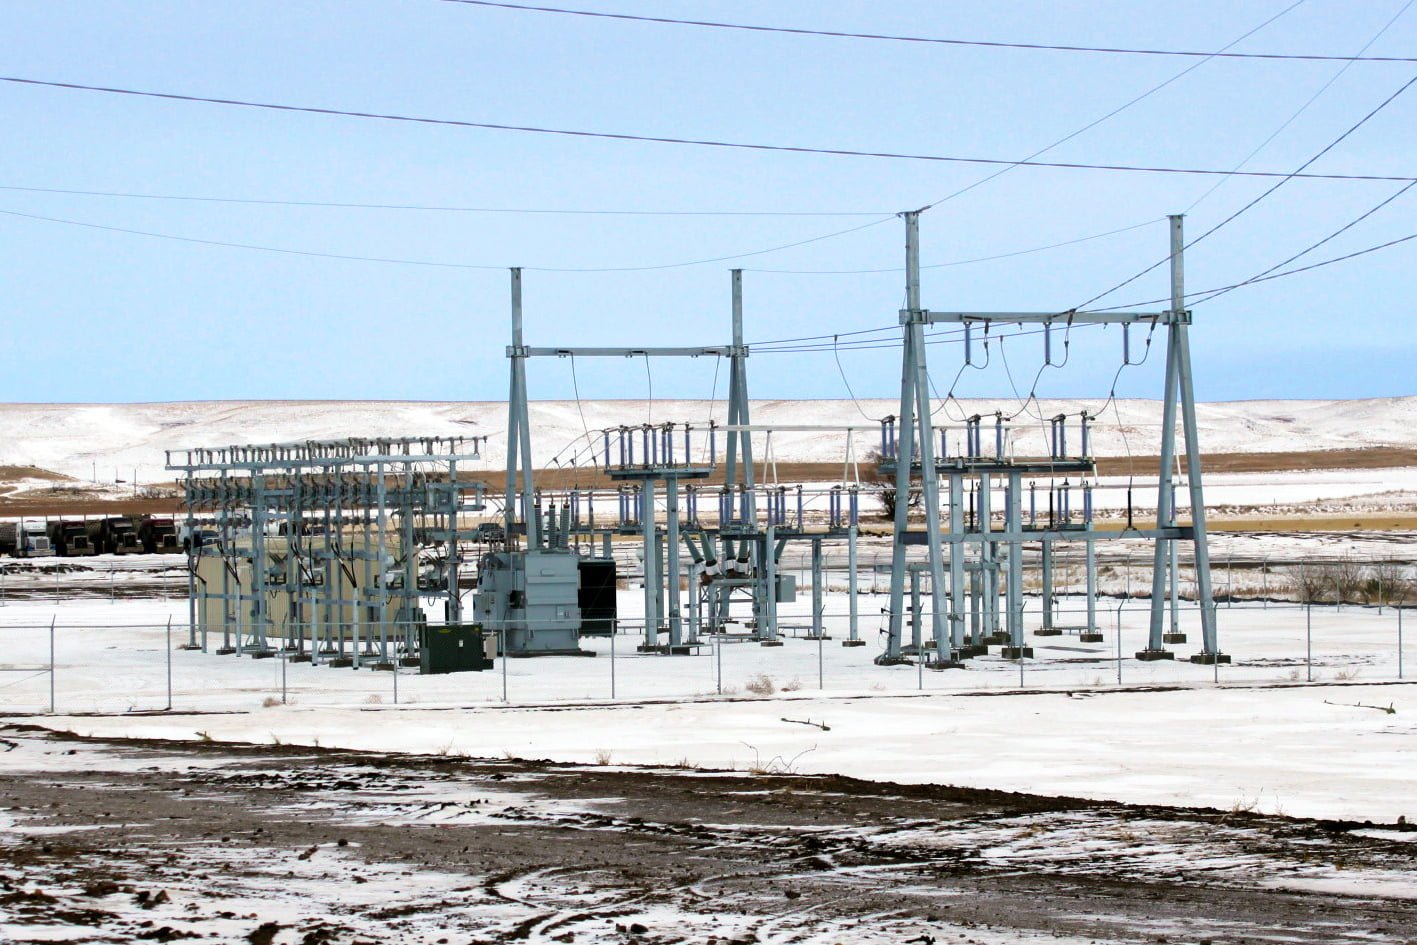 Mountrail-Williams Substation in winter